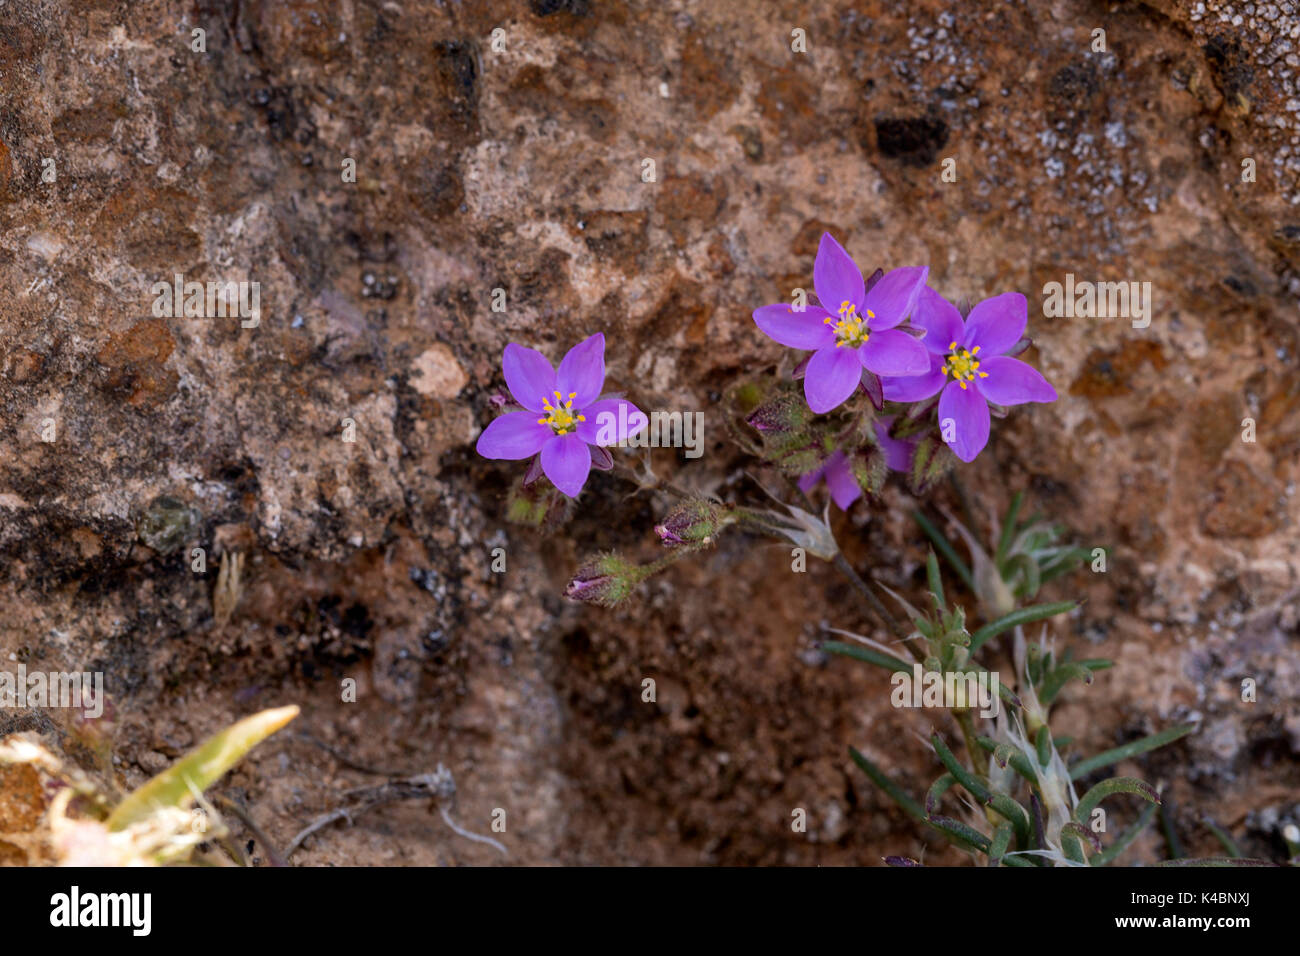 The First Plants And Flowers Of A New Vegetation In The Cold Lava Flow At Mancha Blanca, Lanzarote, Canary Islands, Spain Stock Photo